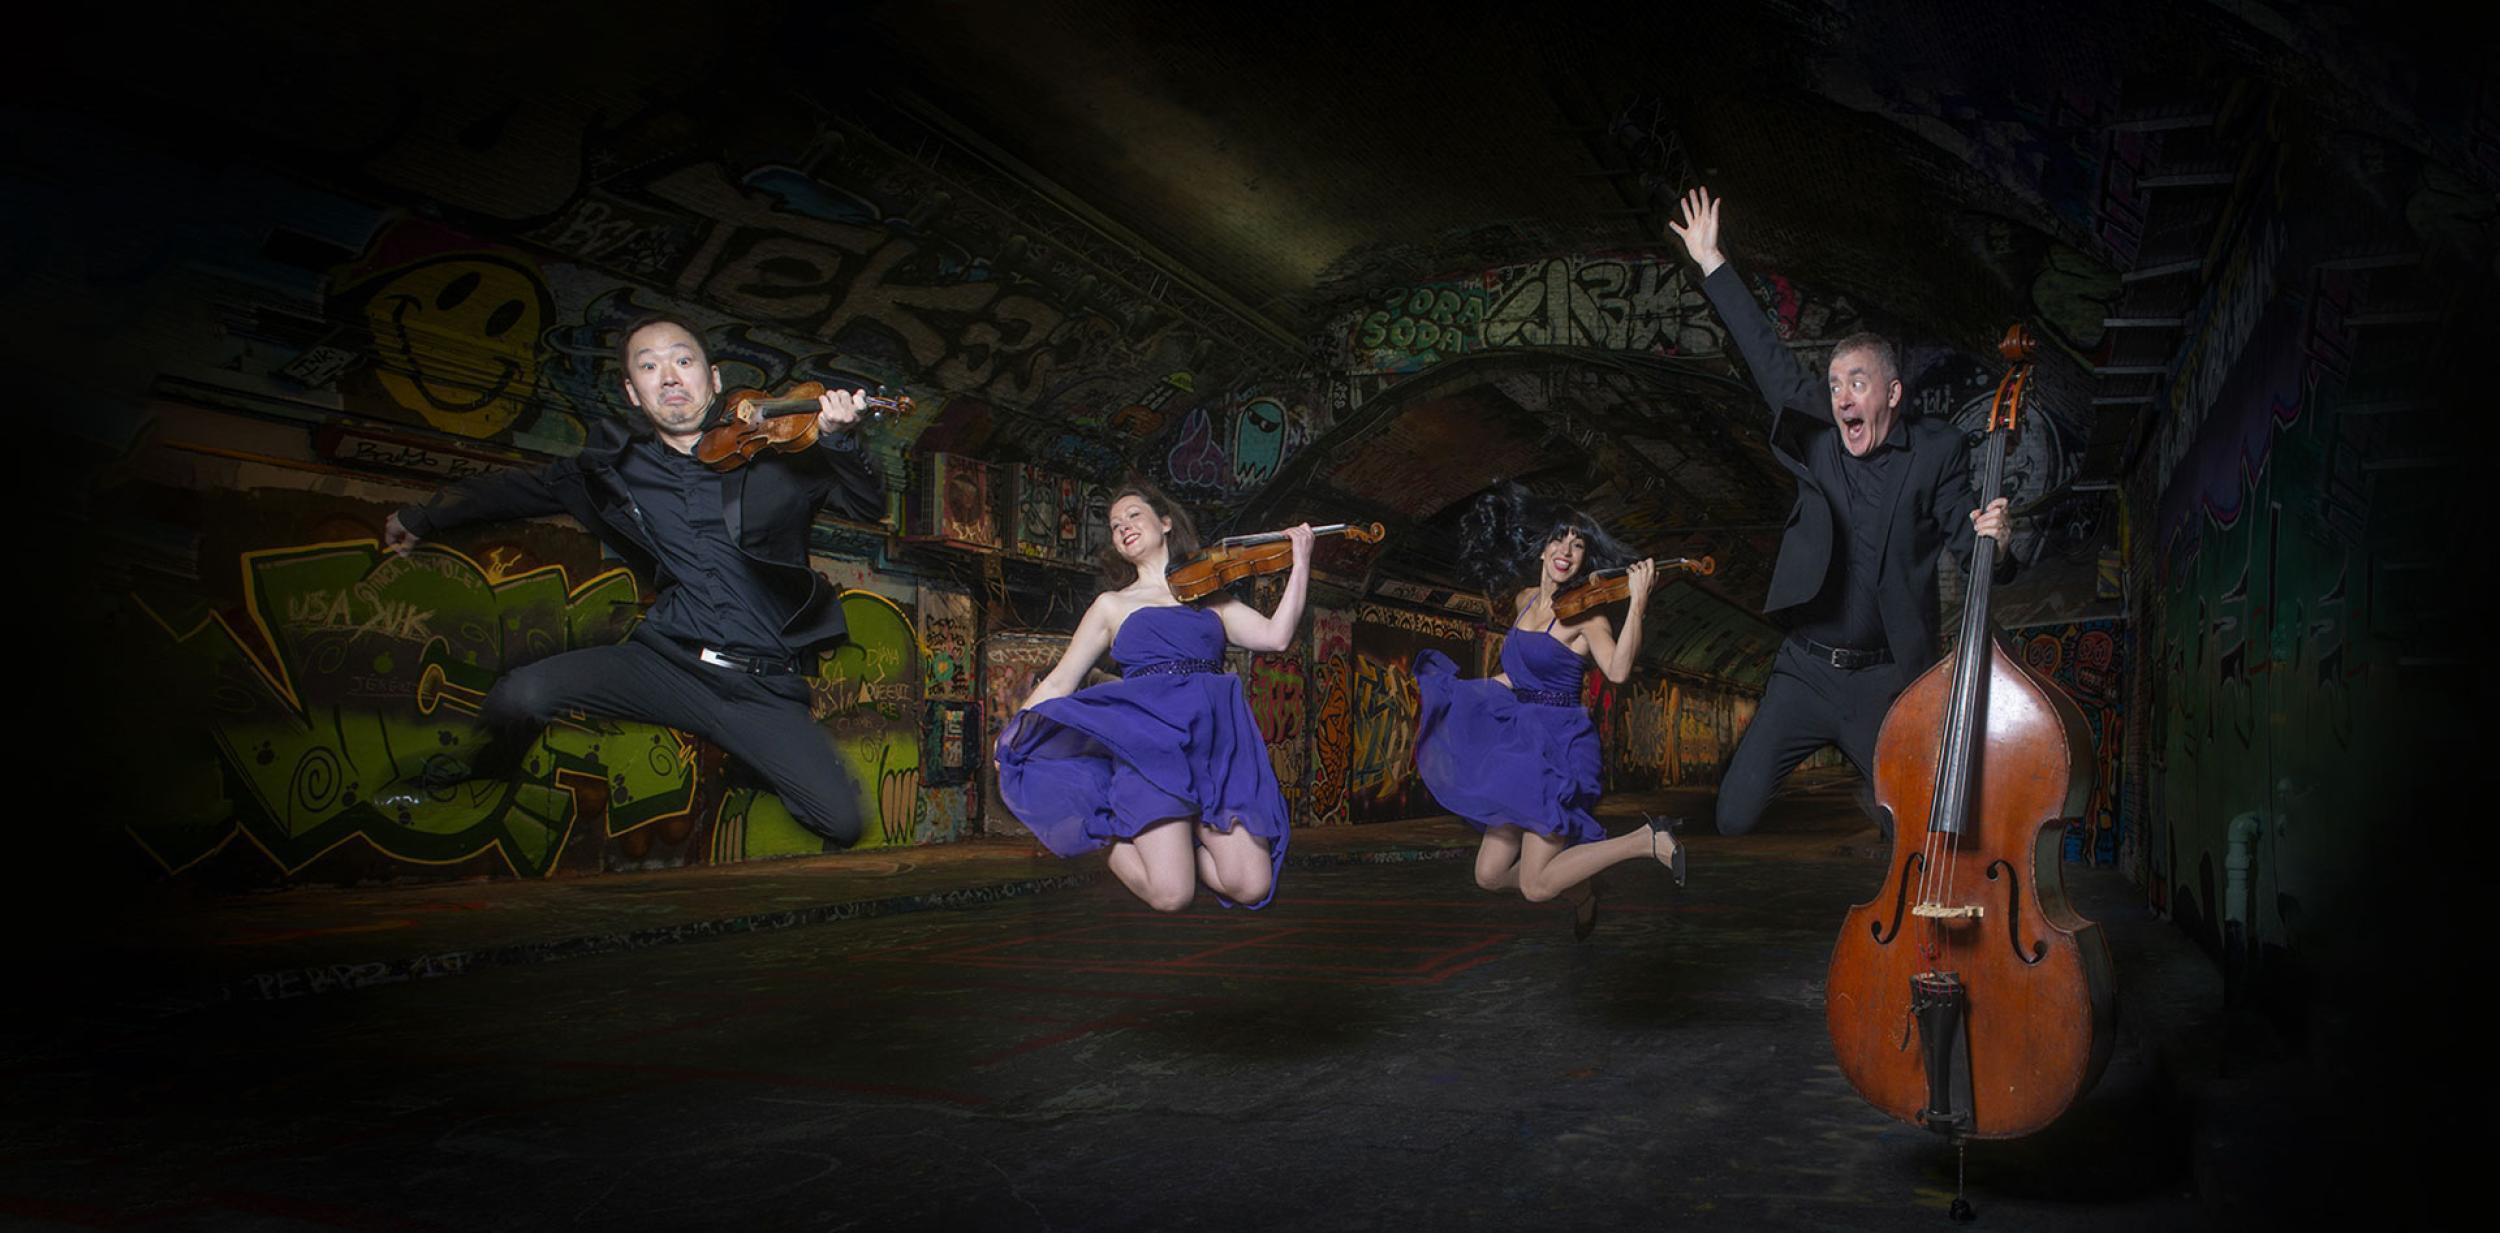 Four classical musicians leaping into the air inside a tunnel covered in graffiti